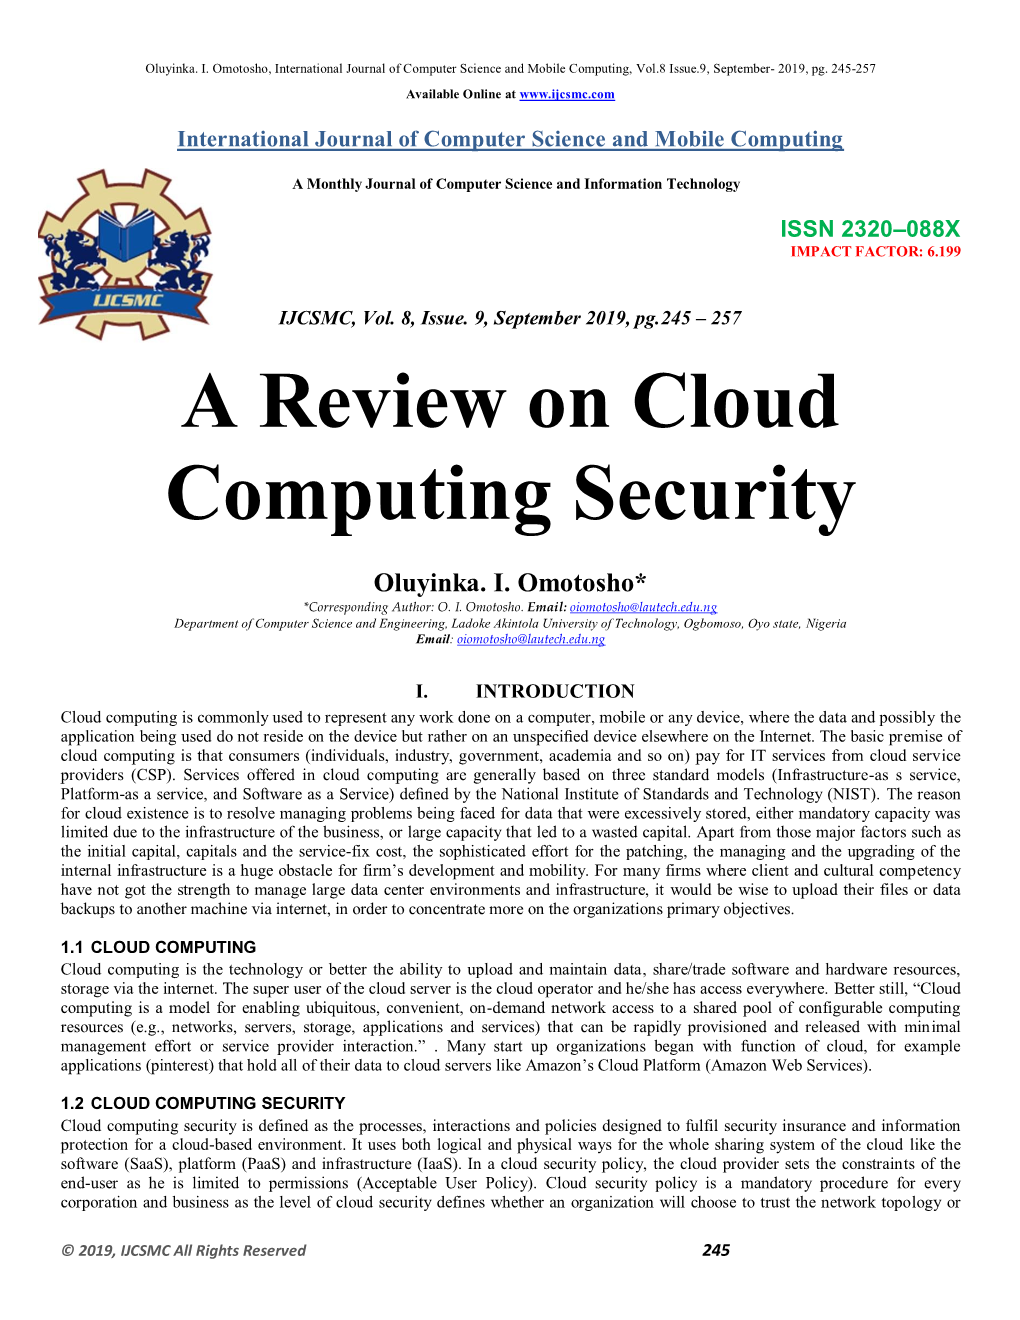 A Review on Cloud Computing Security